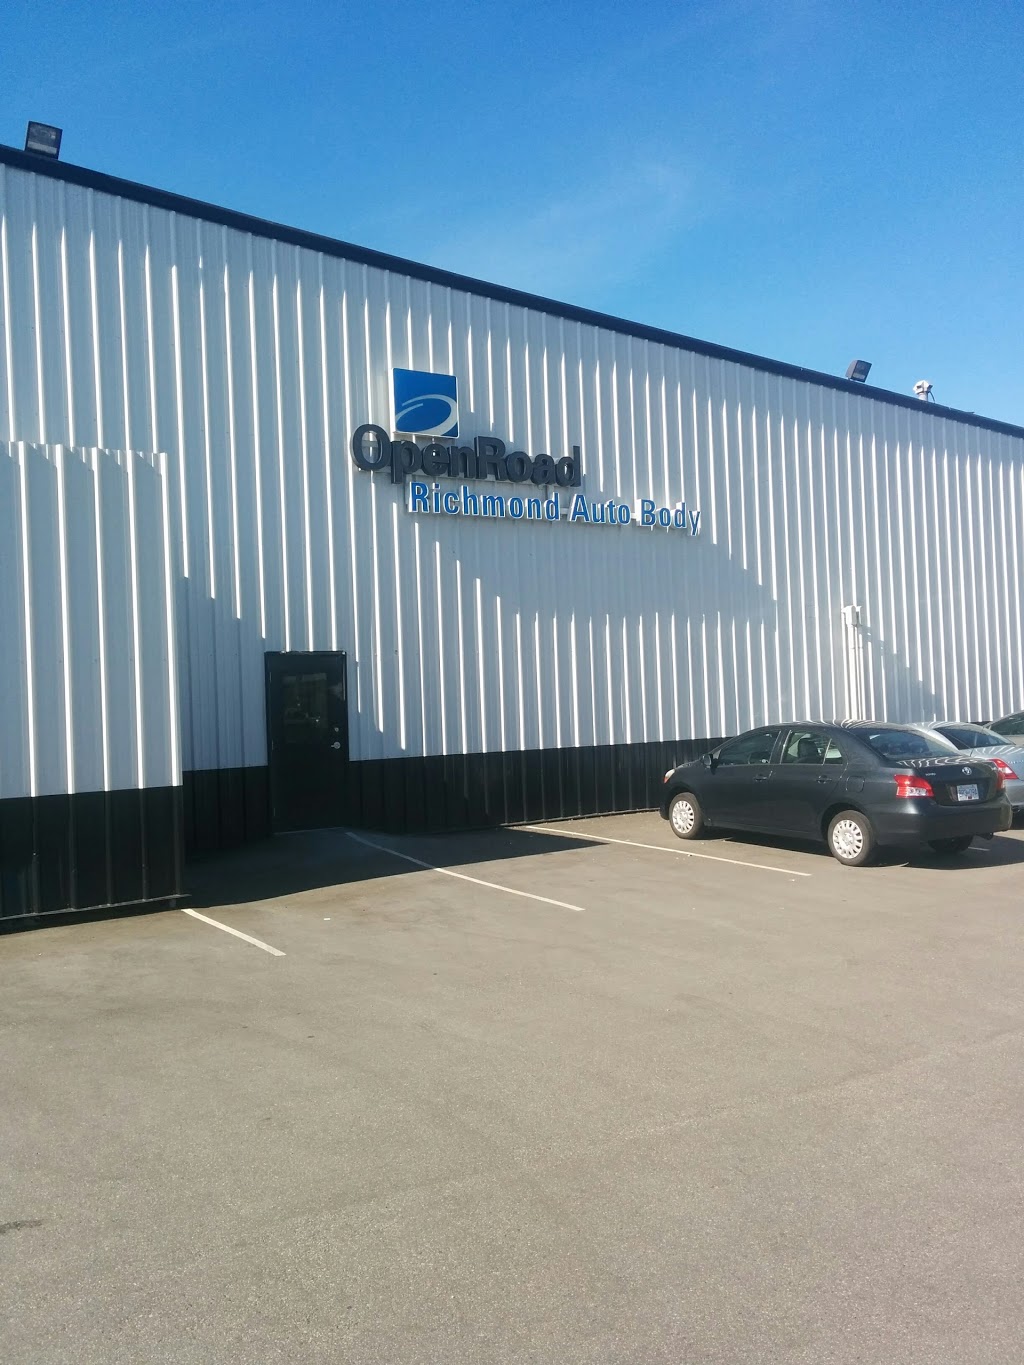 OpenRoad Richmond Auto Body Langley | 5923 Production Way, Langley City, BC V3A 4N5, Canada | Phone: (604) 532-9158